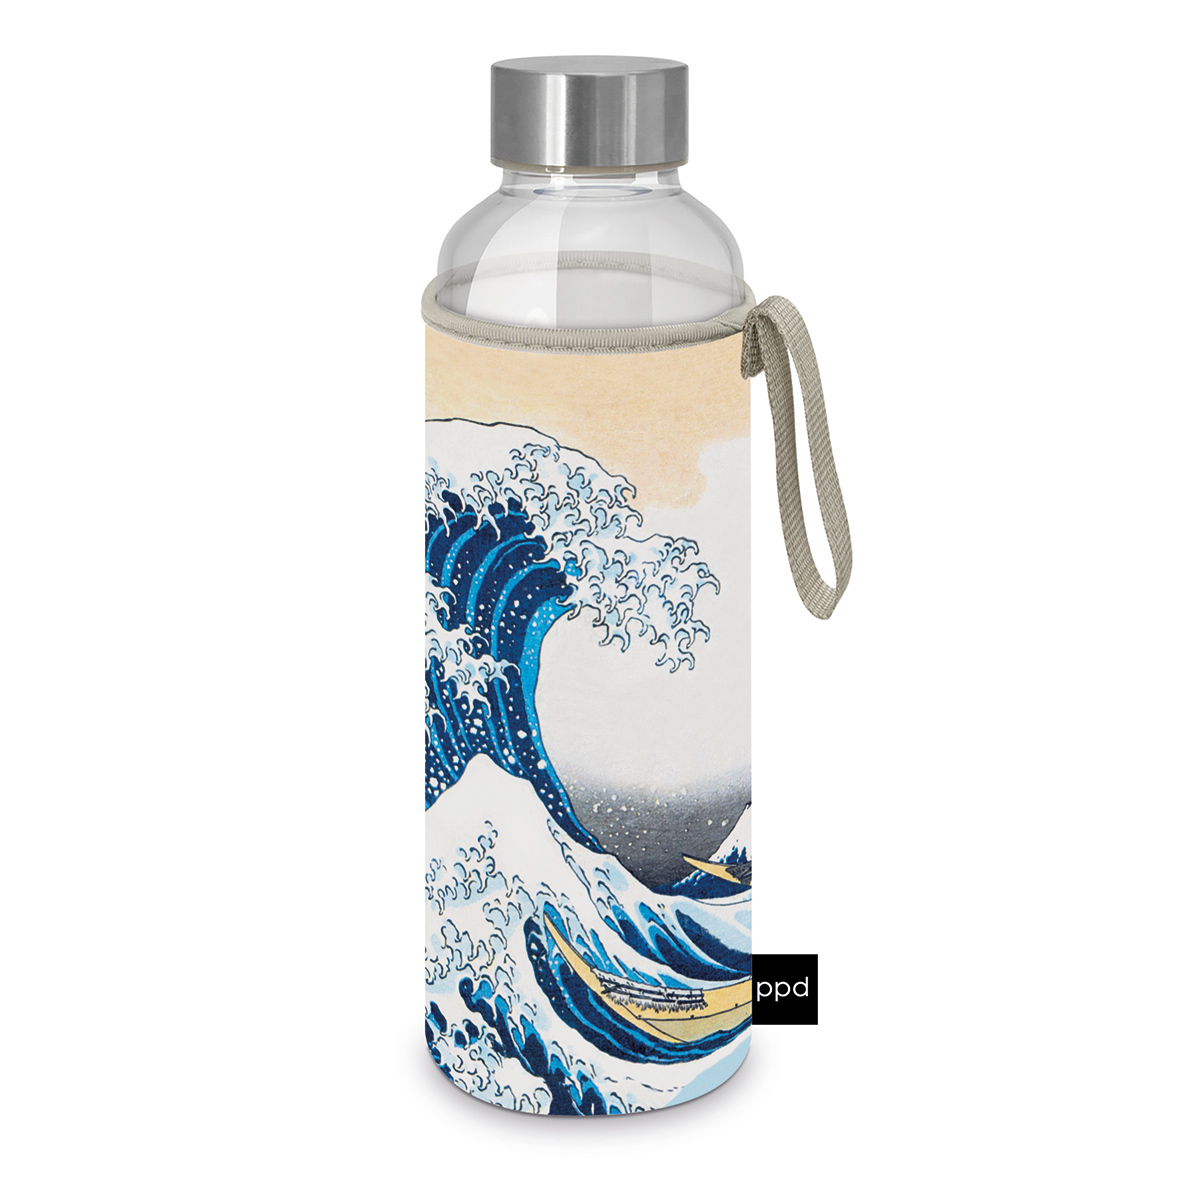 The Great wave Bottle & Sleeve 5